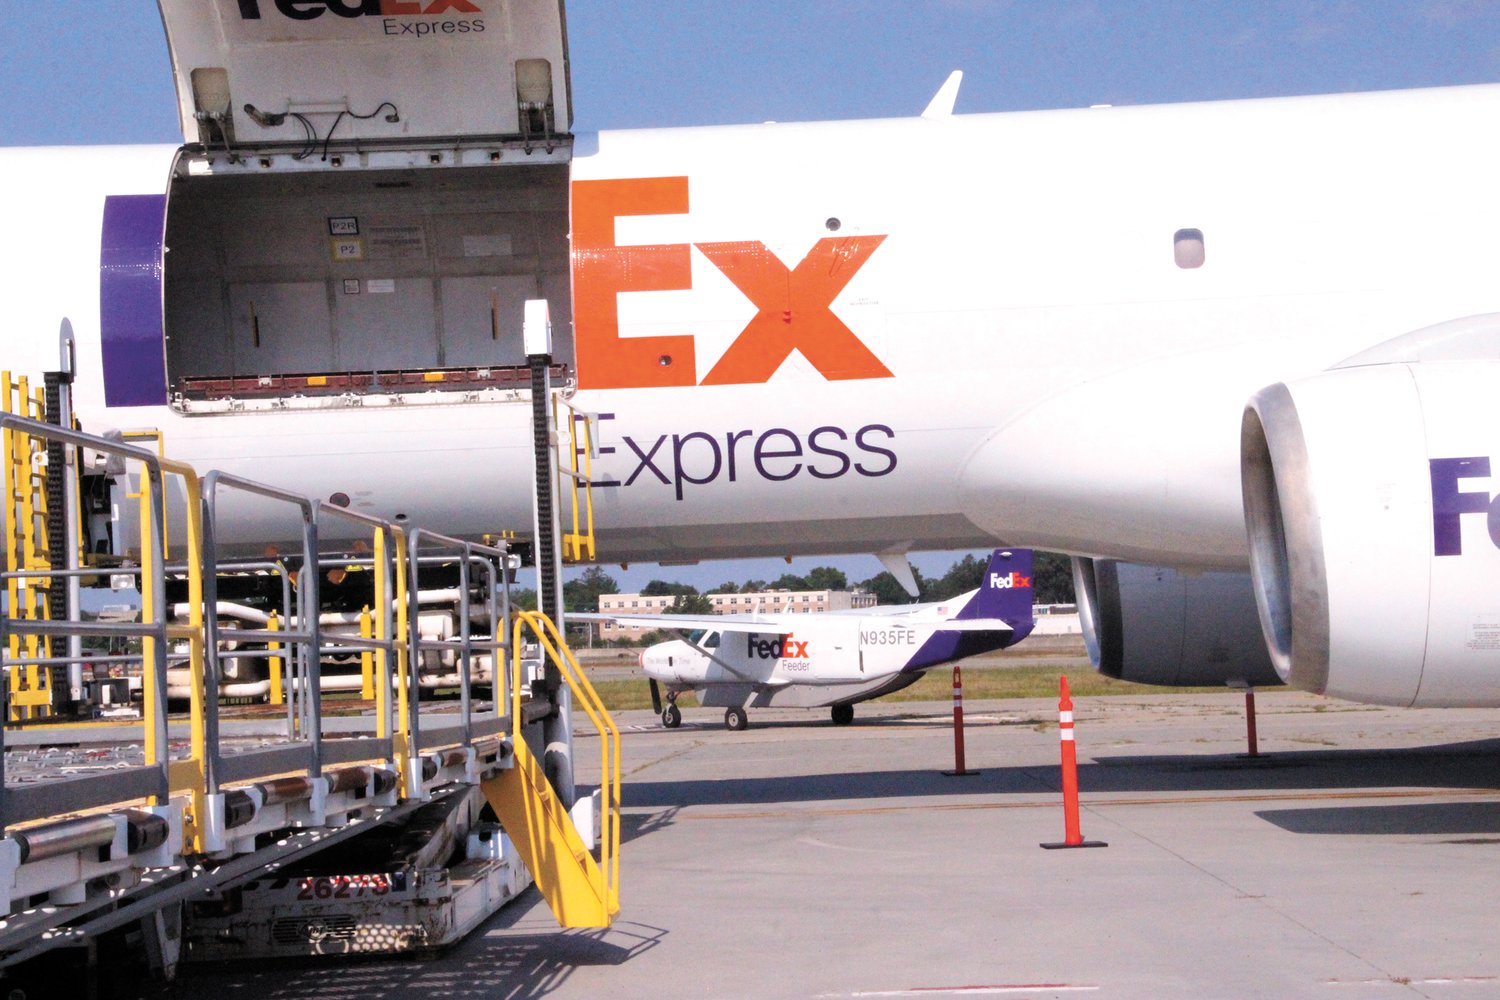 BIG BROTHER LITTLE SISTER: A FedEx 757 dwarfs a smaller plane from the FedEx fleet on its way to make a delivery. (Cranston Herald photos)